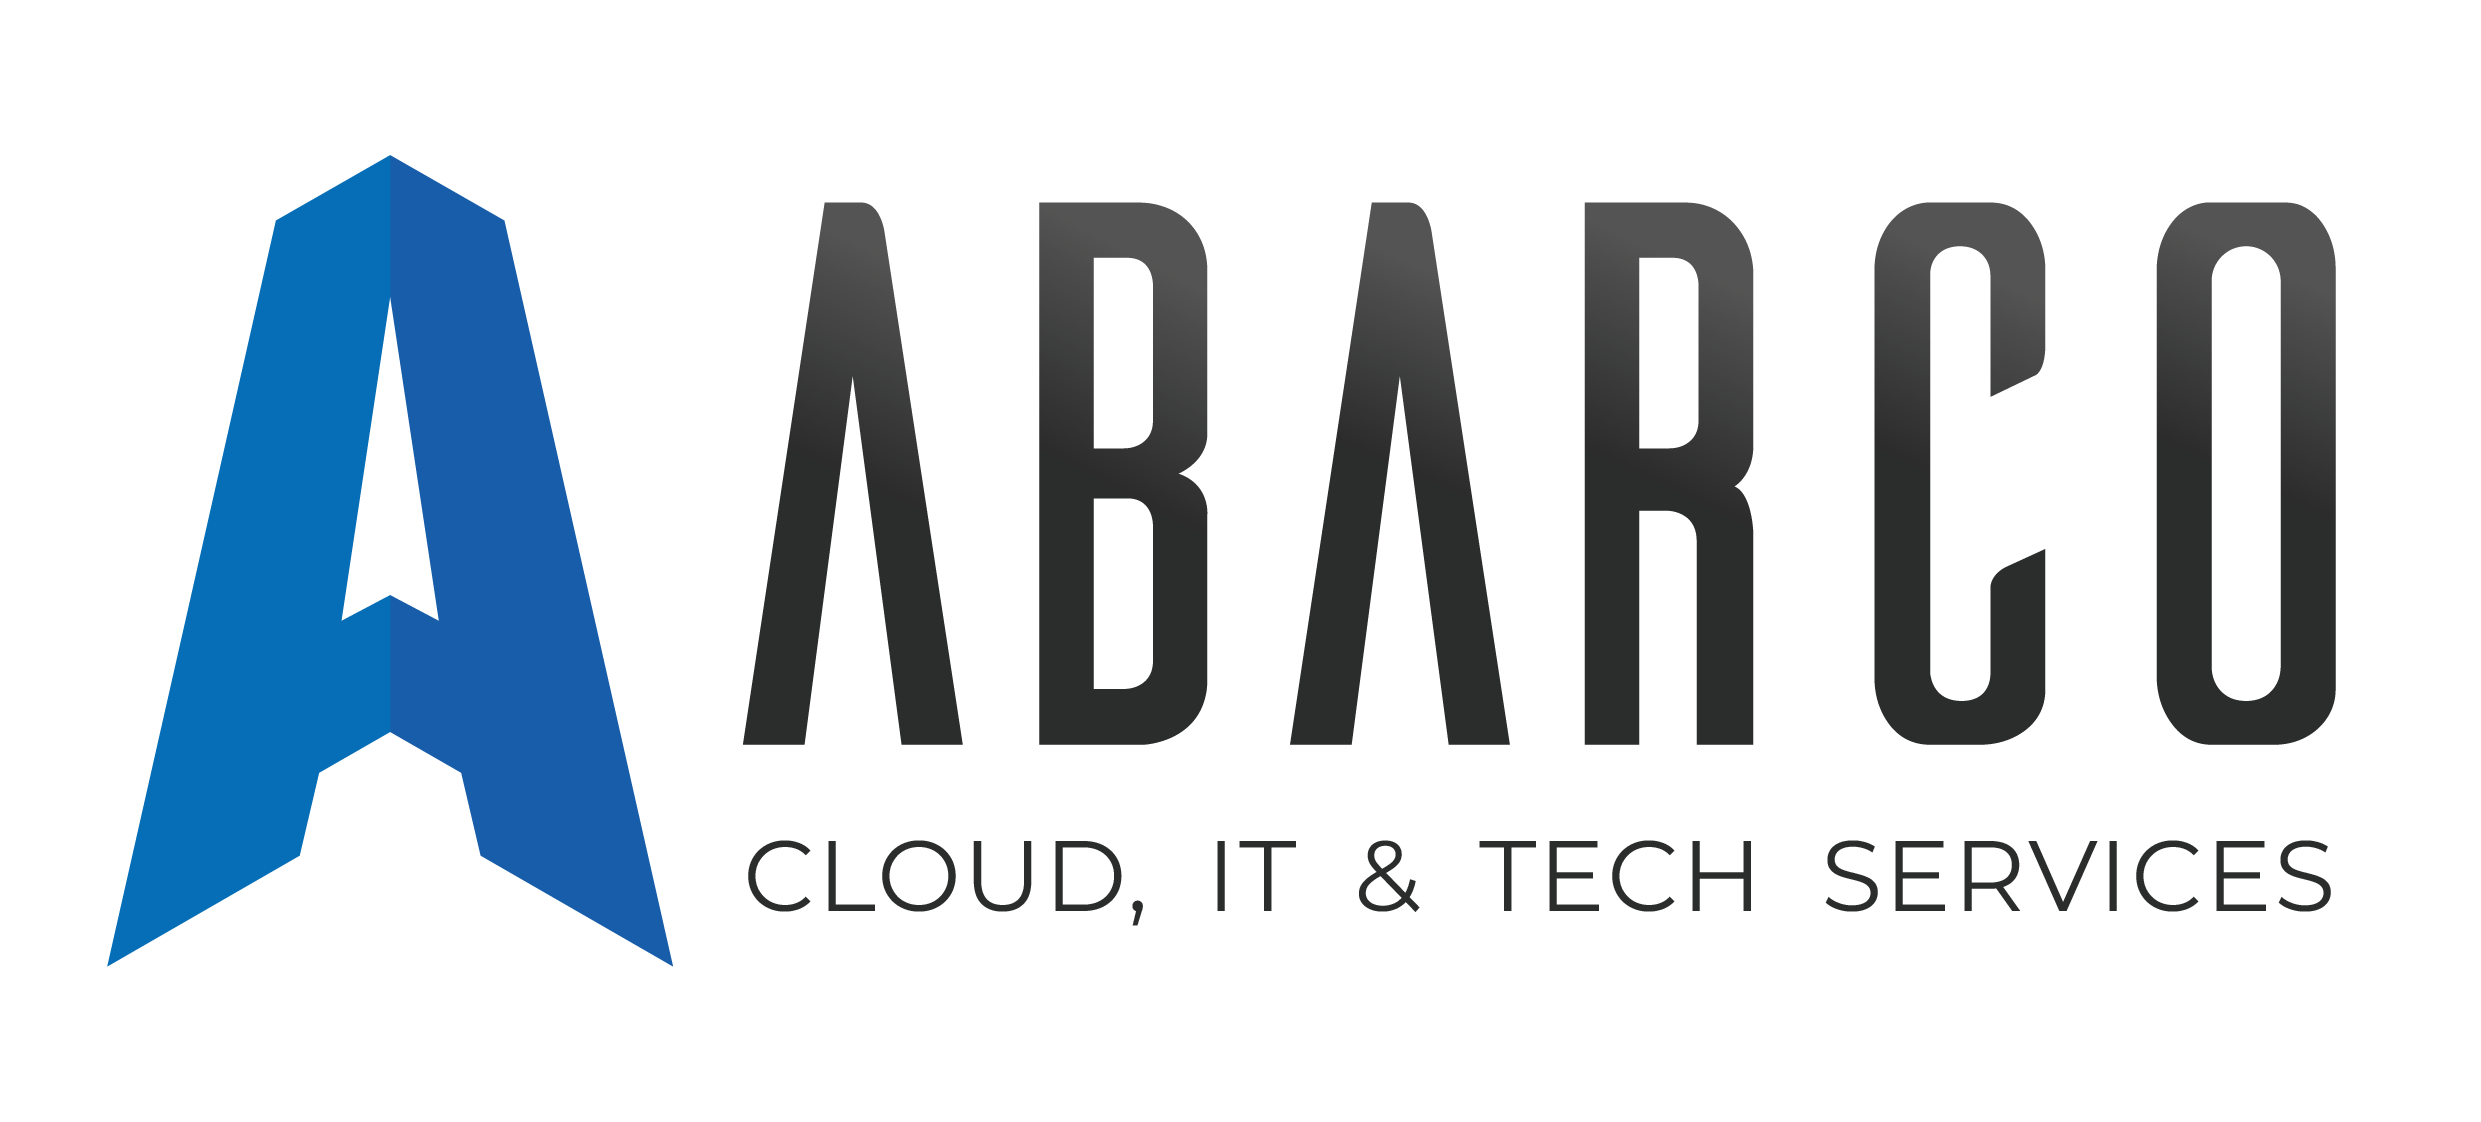 abarco-cloudtechservices